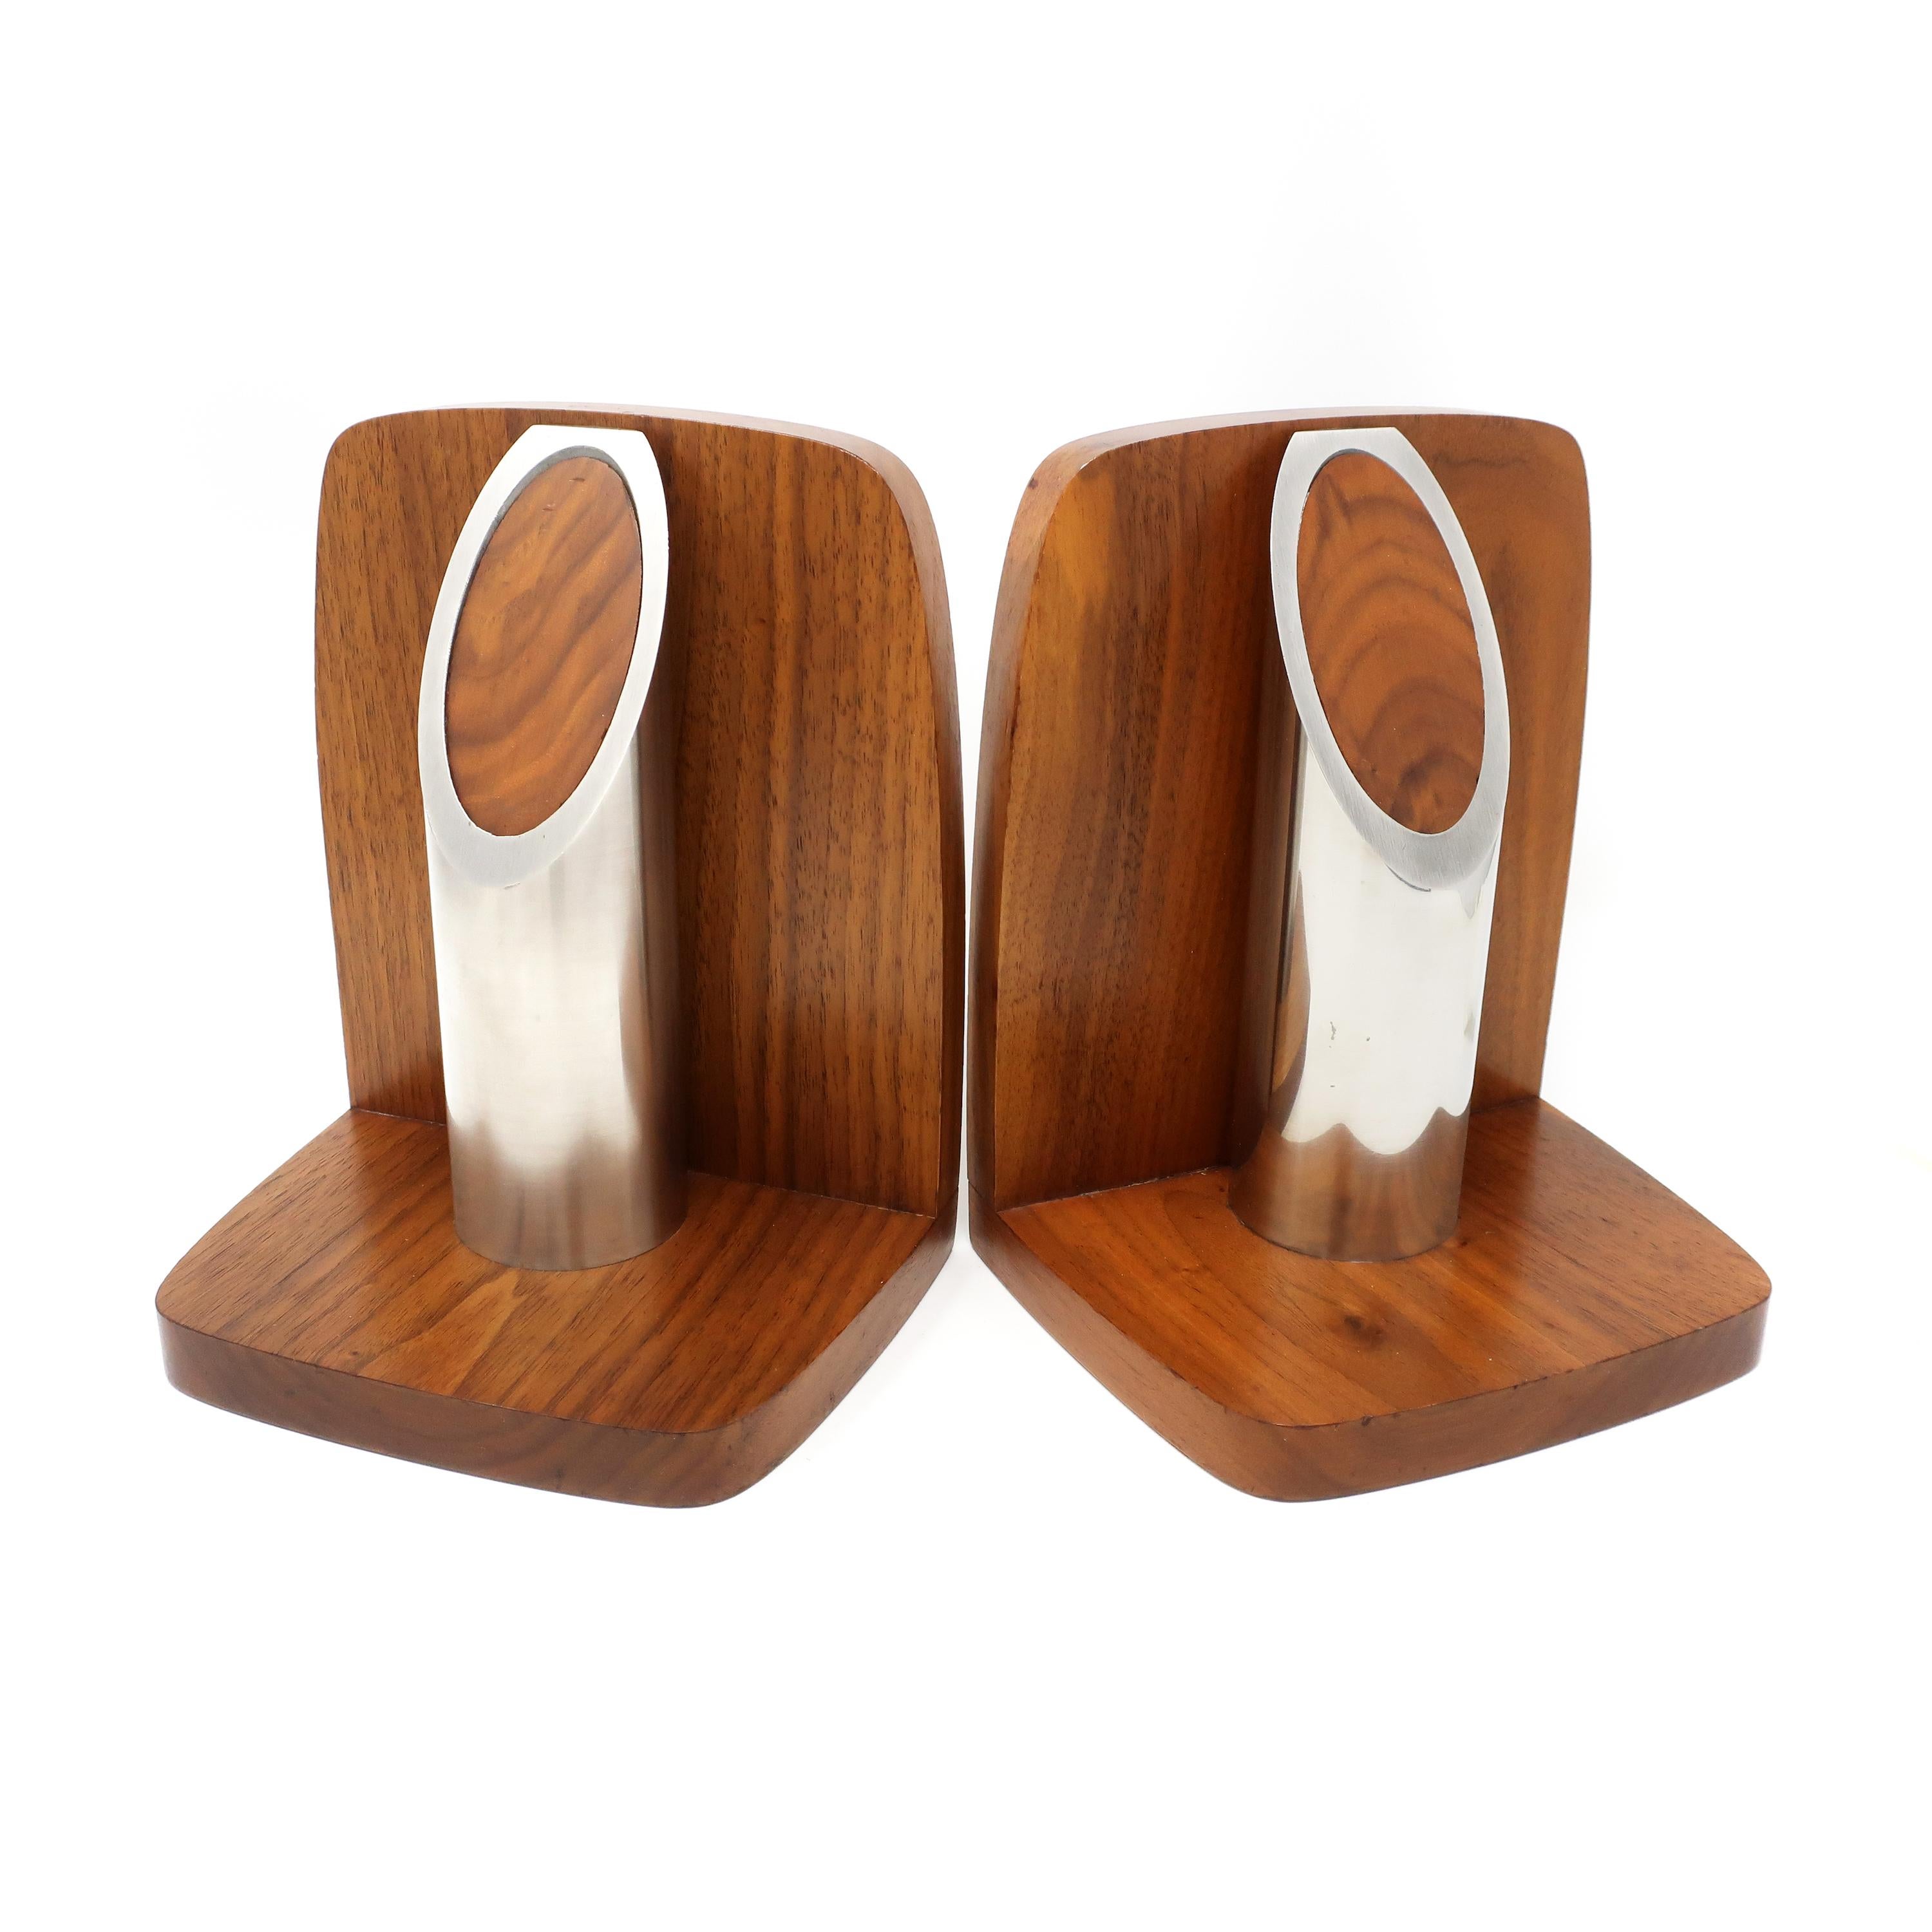 A lovely pair of Art Deco or early Mid-Century Modern bookends. Constructed from walnut with an aluminum cylinder cut at an angle filled with a walnut insert. Felt on underside, sticker on rear (reads “Solid American Walnut”), and no maker’s mark.